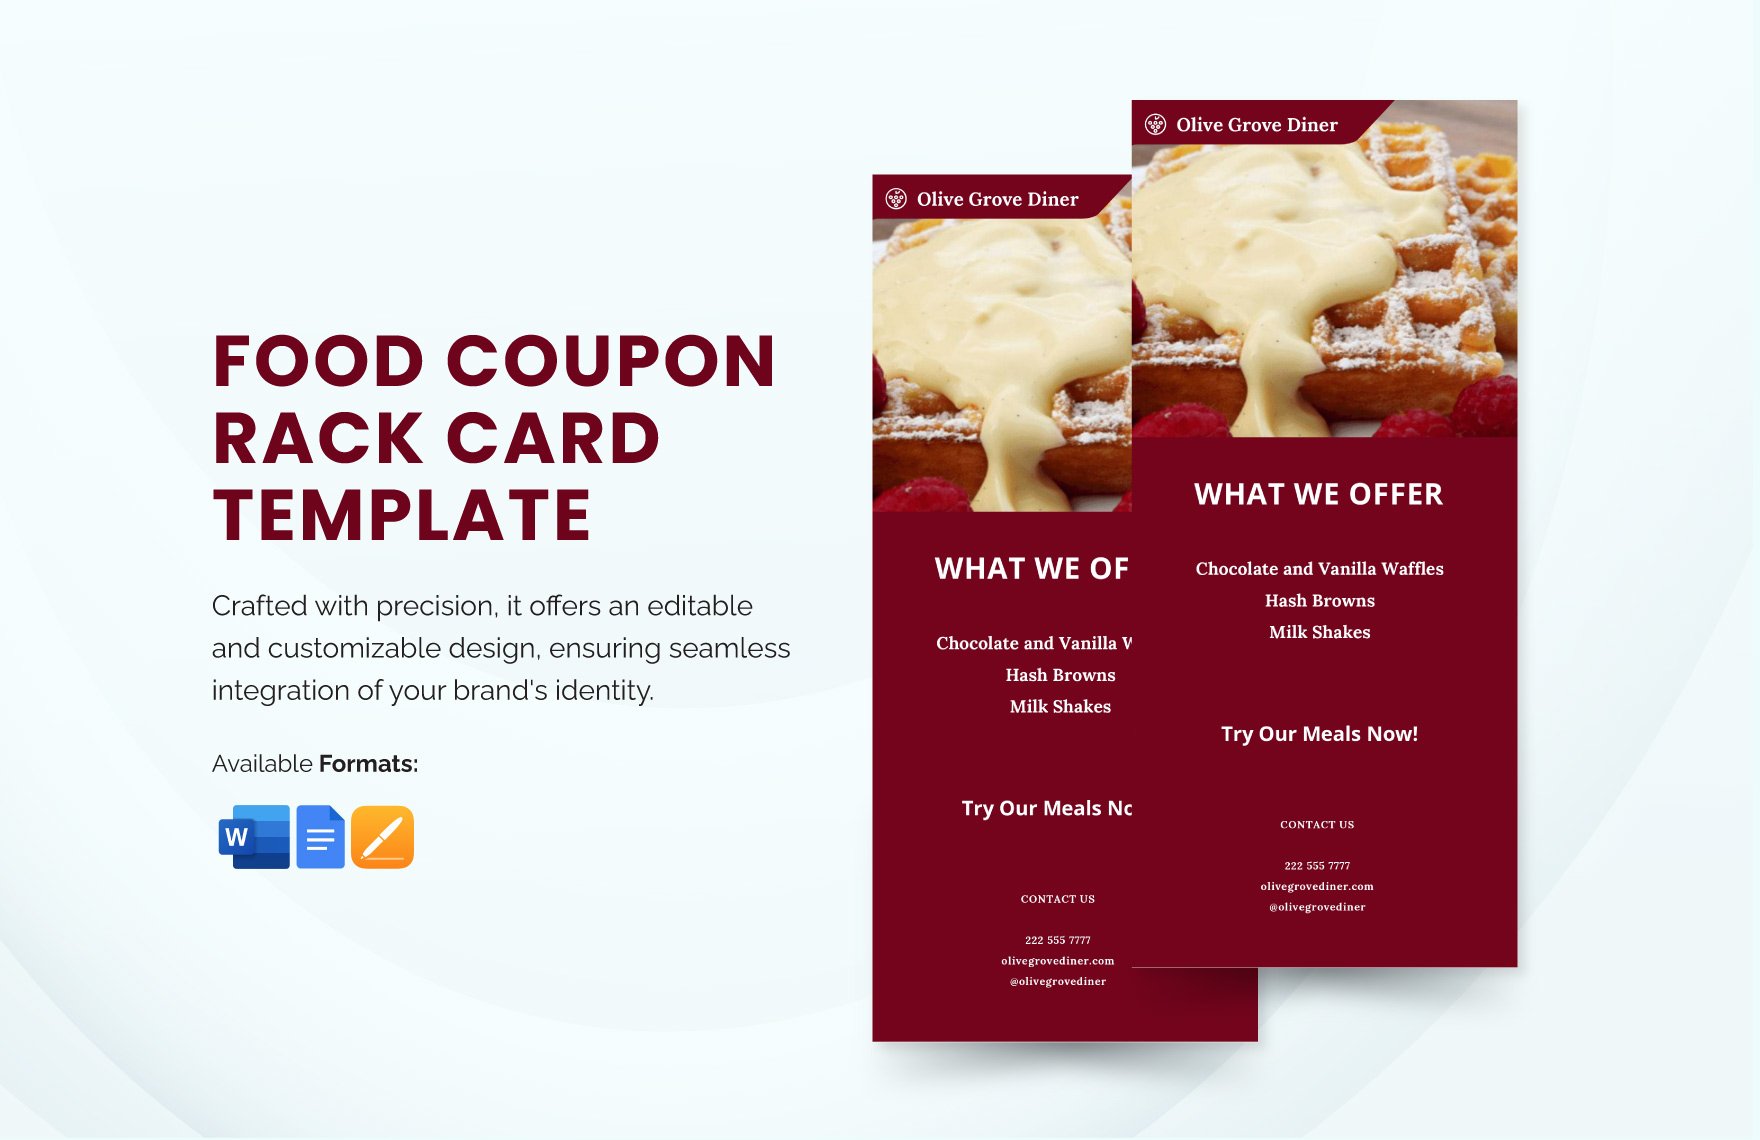 Diner Rack Card Template in Word, Google Docs, Apple Pages